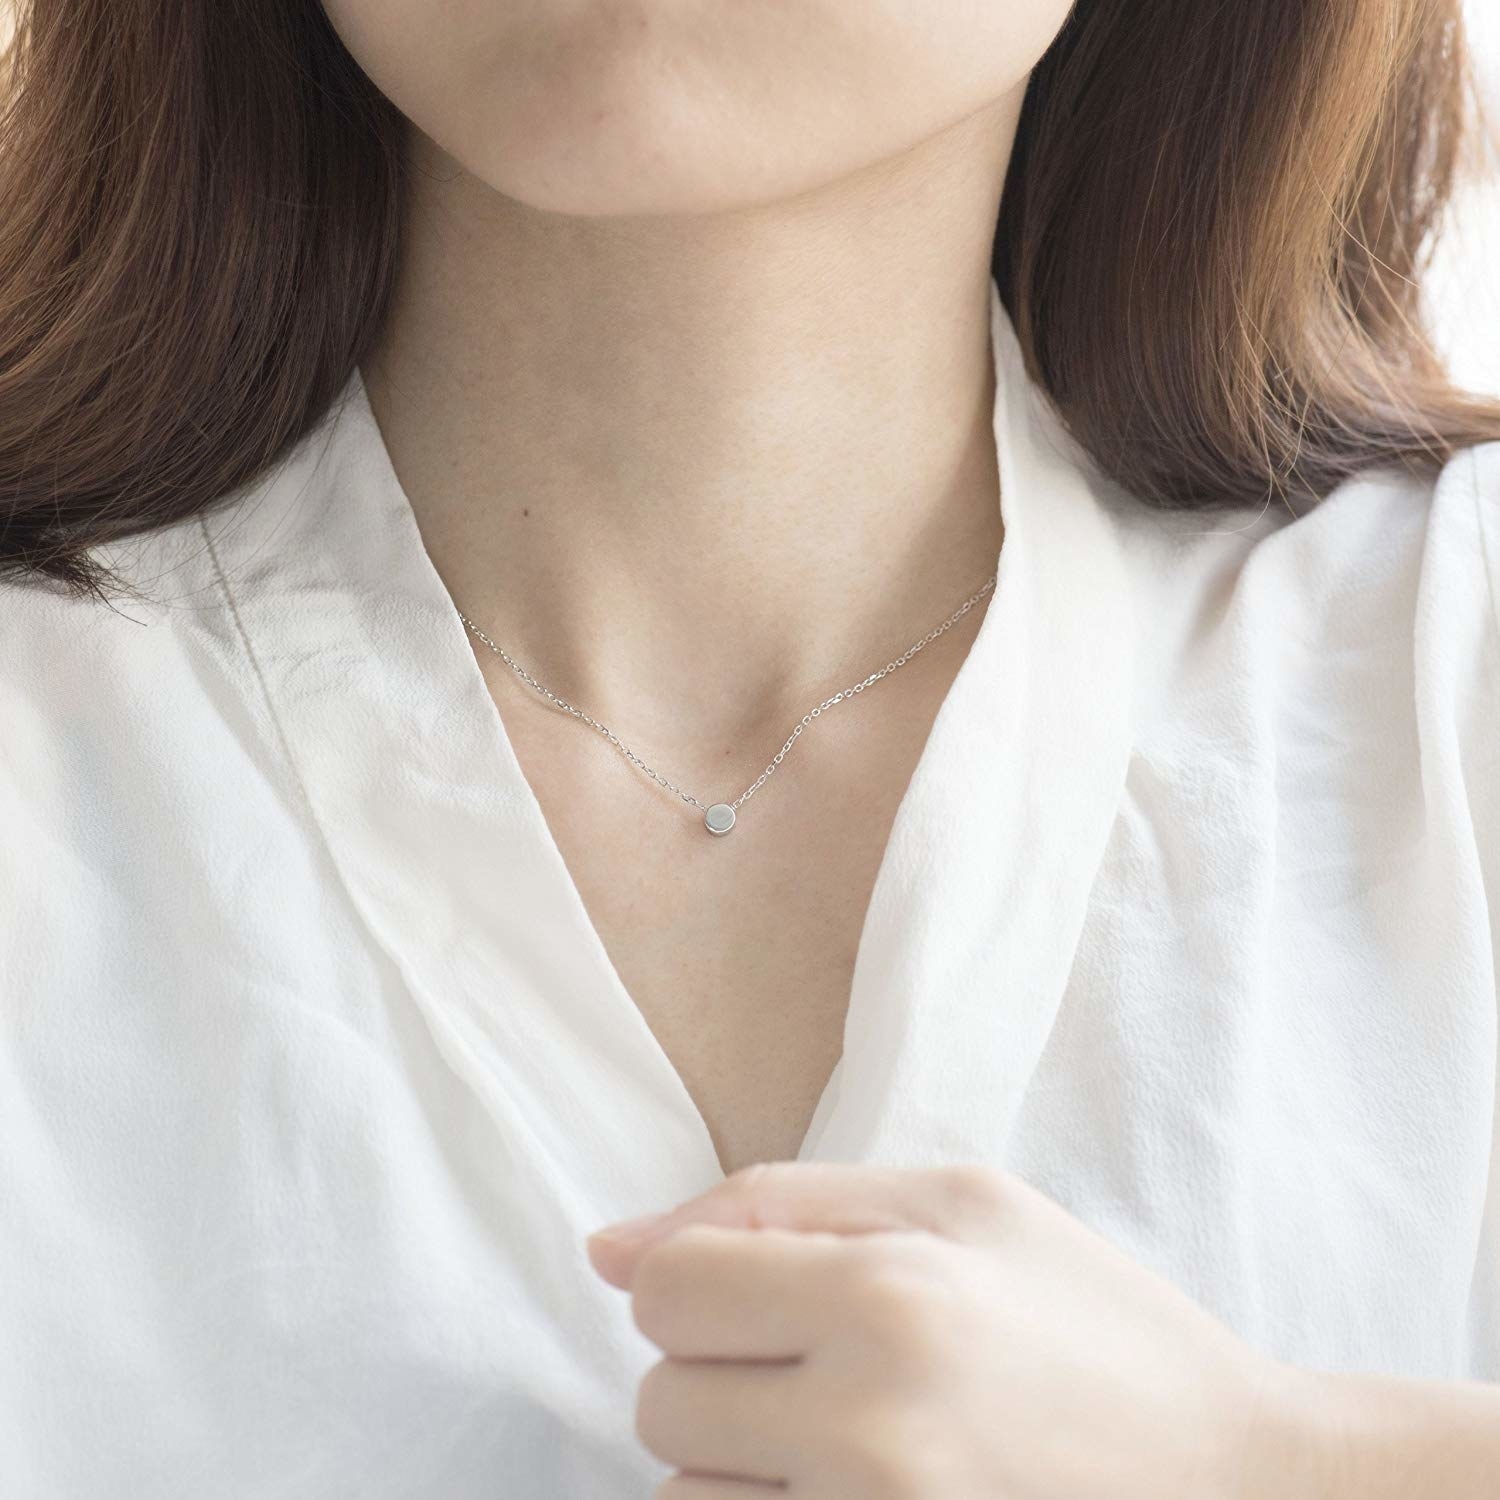 A model wearing a V-neck white shirt and a dainty silver dot necklace